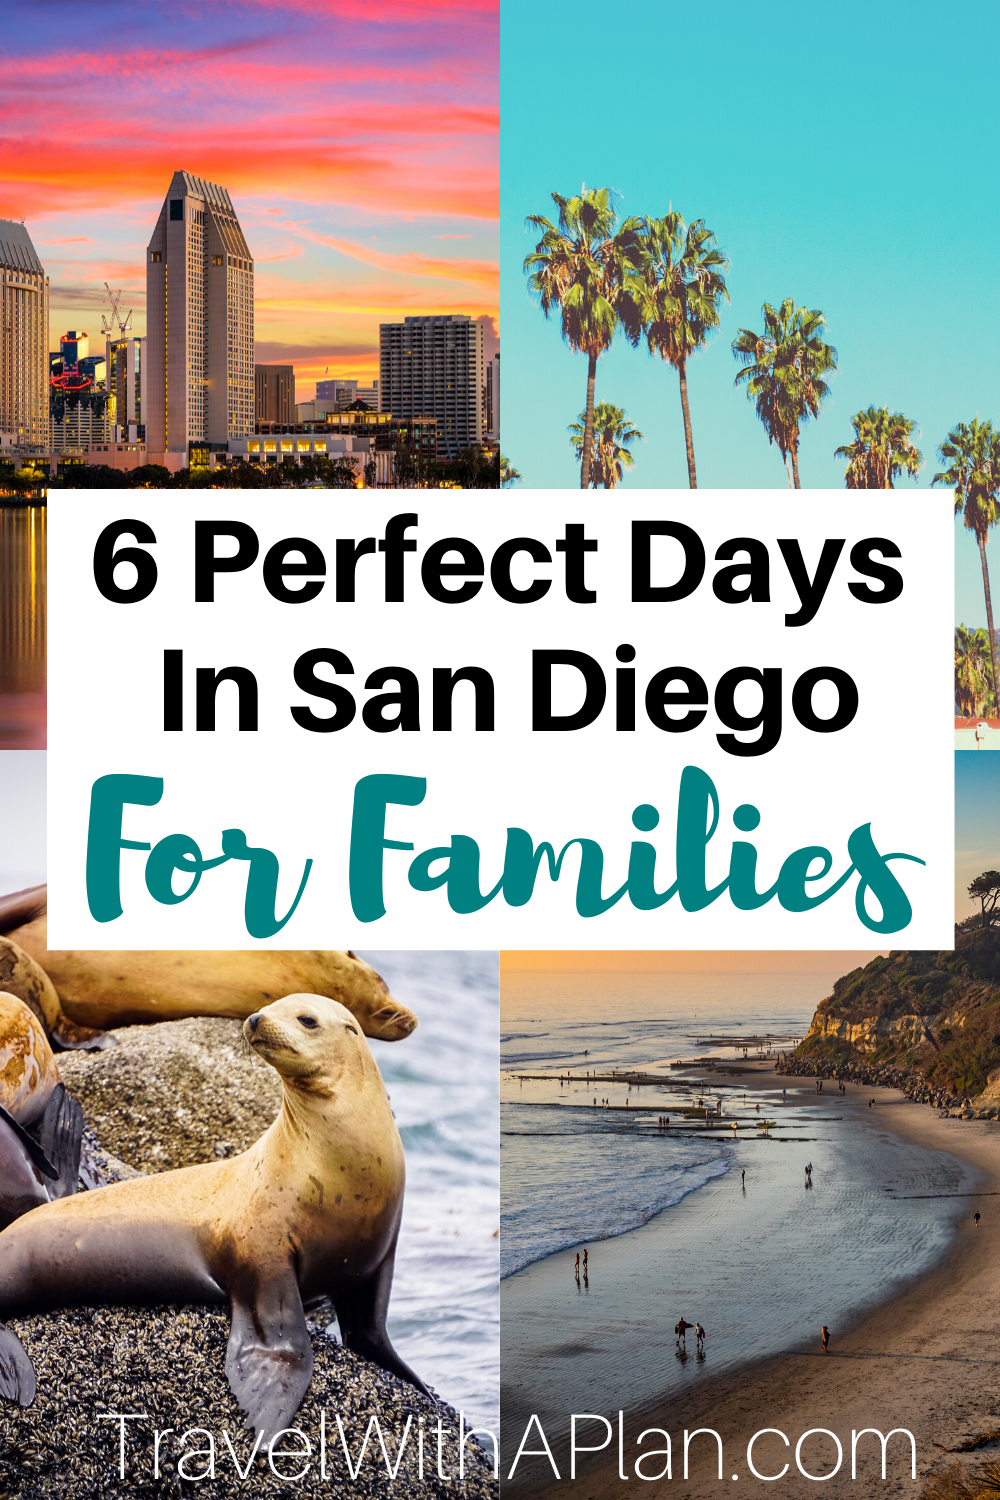 Looking for the best San Diego itinerary for families?  As one of our favorite vacation spots, we know exactly how to see and do the most popular and scenic attractions and sights in San Diego!  Click here now to discover our exact 6-day San Diego itinerary!  #sandiegoitinerary #sandiegowithkids #whattodoinsandiego #6dayandiegoitinerary #sandiegoin6days 